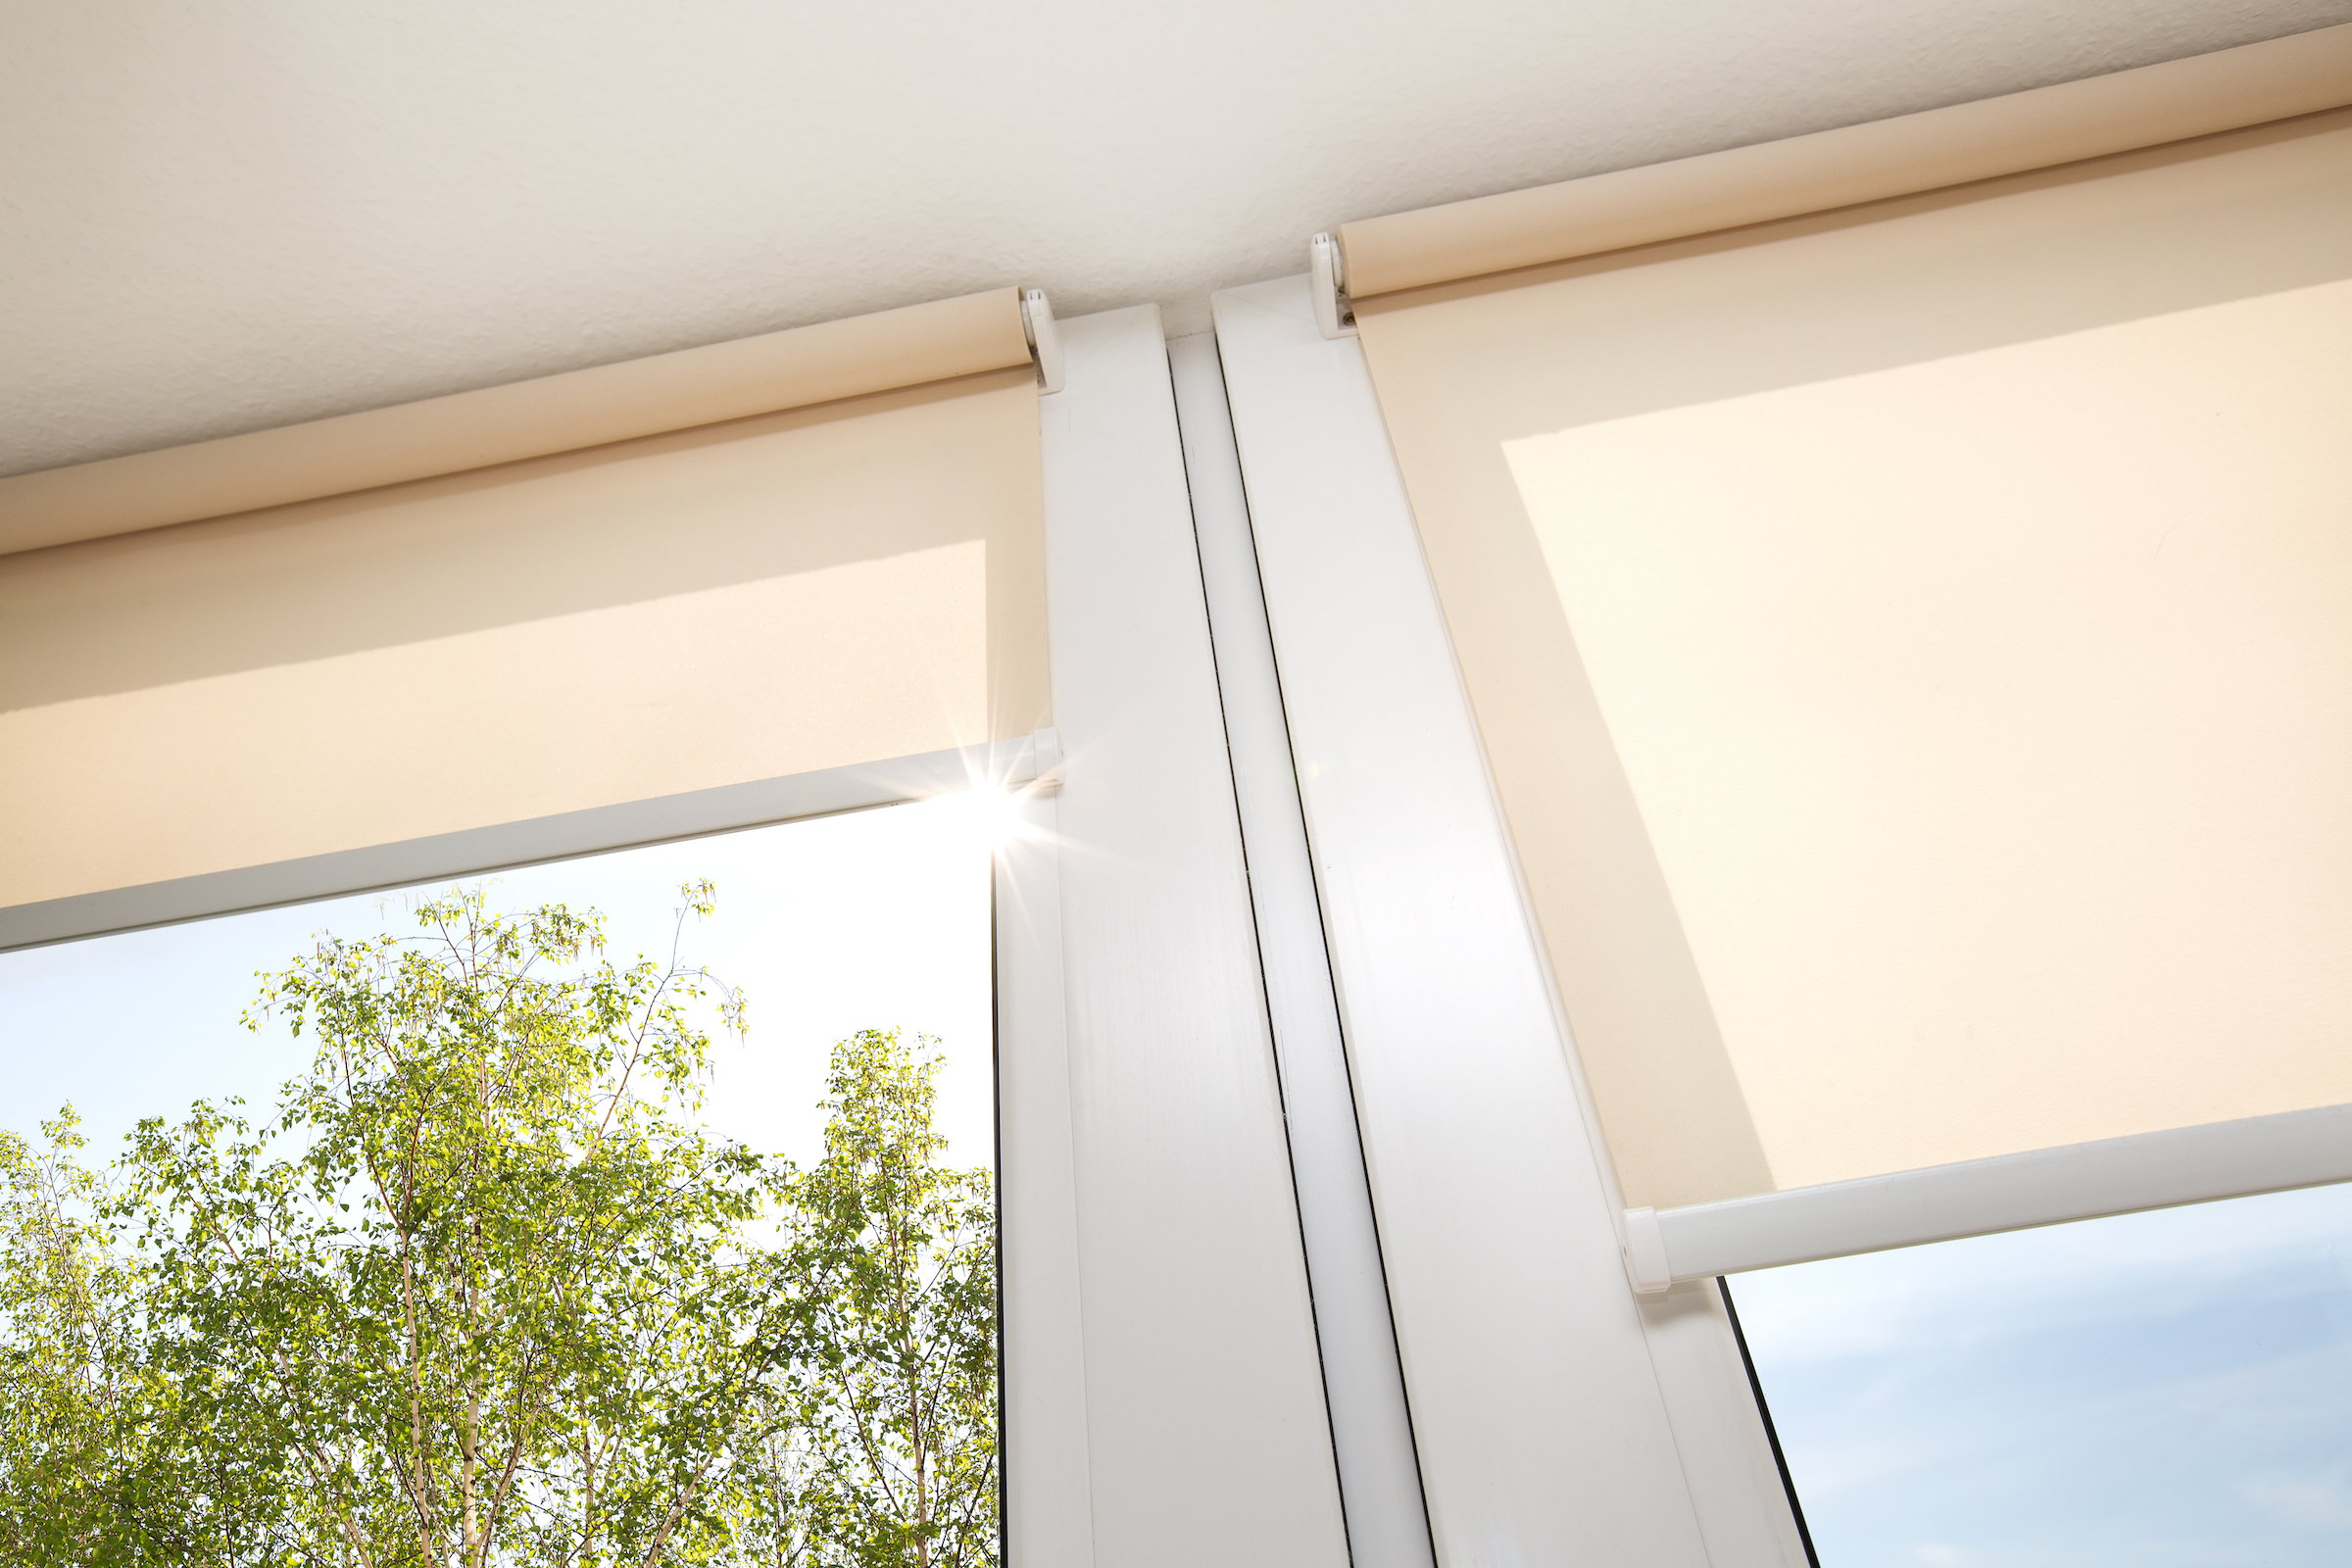 How To Install Blinds A Step By Step Guide